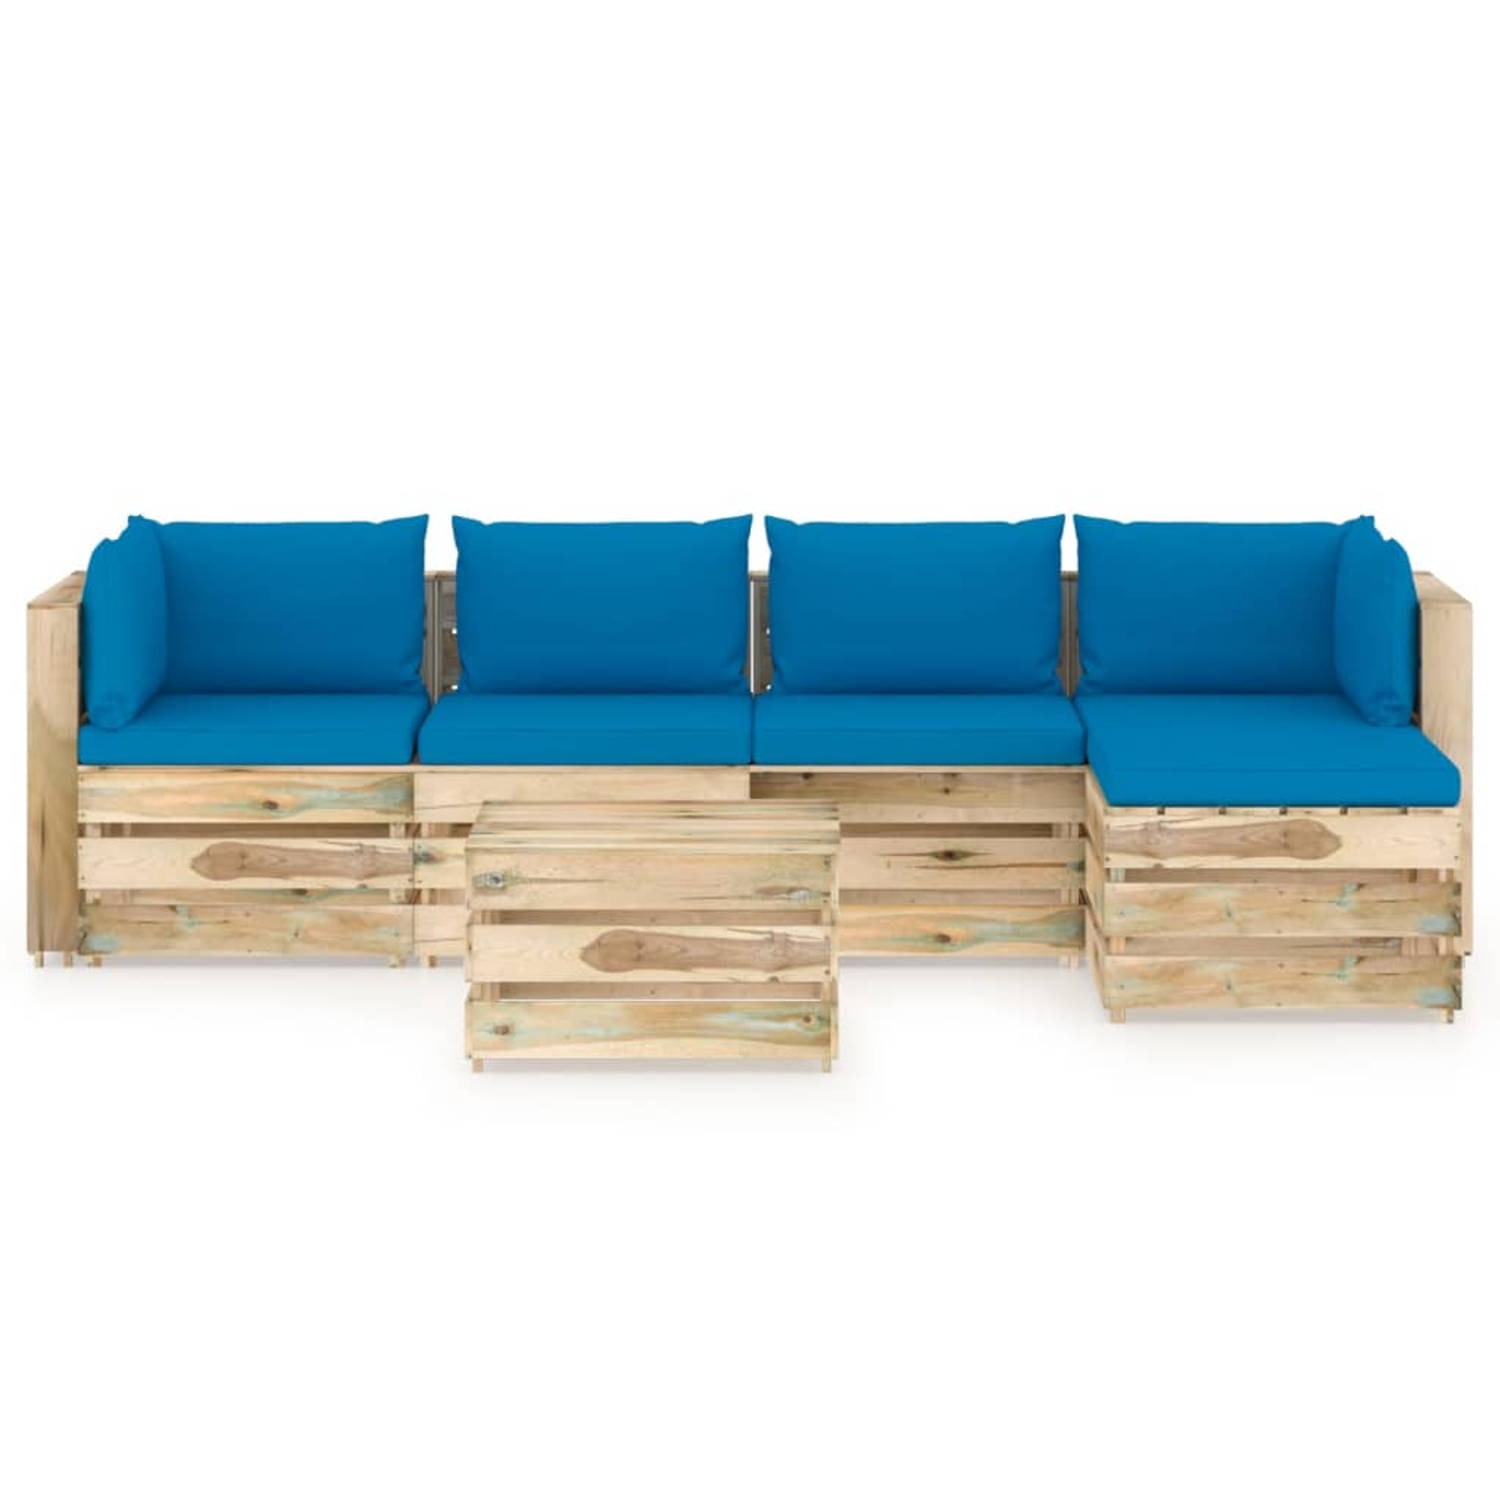 The Living Store Pallet Loungeset - Grenenhout - Modulair - 69 x 70 x 66 cm - Lichtblauwe kussens